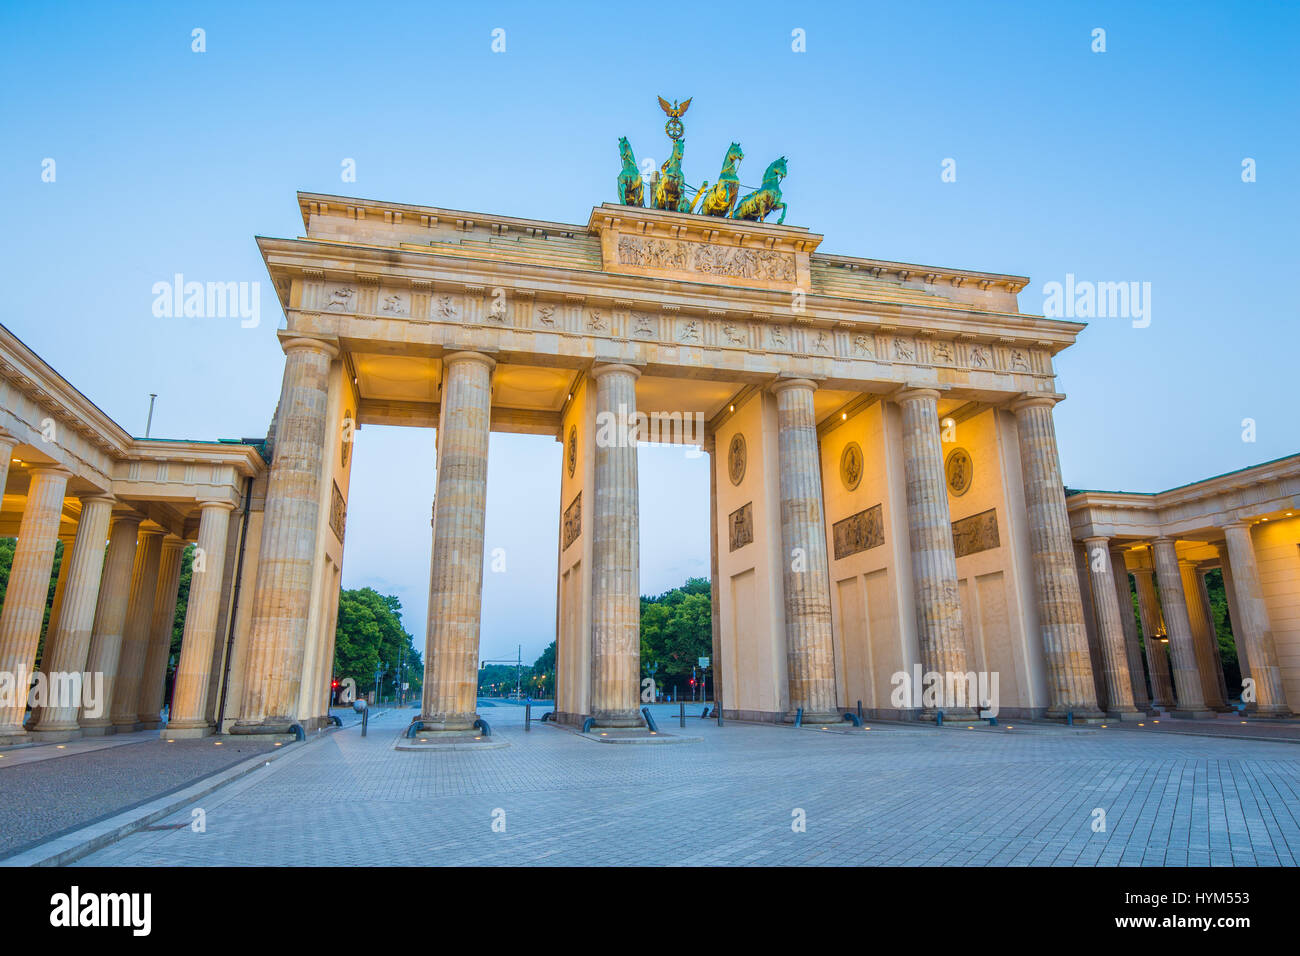 Classic view of famous Brandenburger Tor (Brandenburg Gate), one of the best-known landmarks and national symbols of Germany, in twilight during blue  Stock Photo